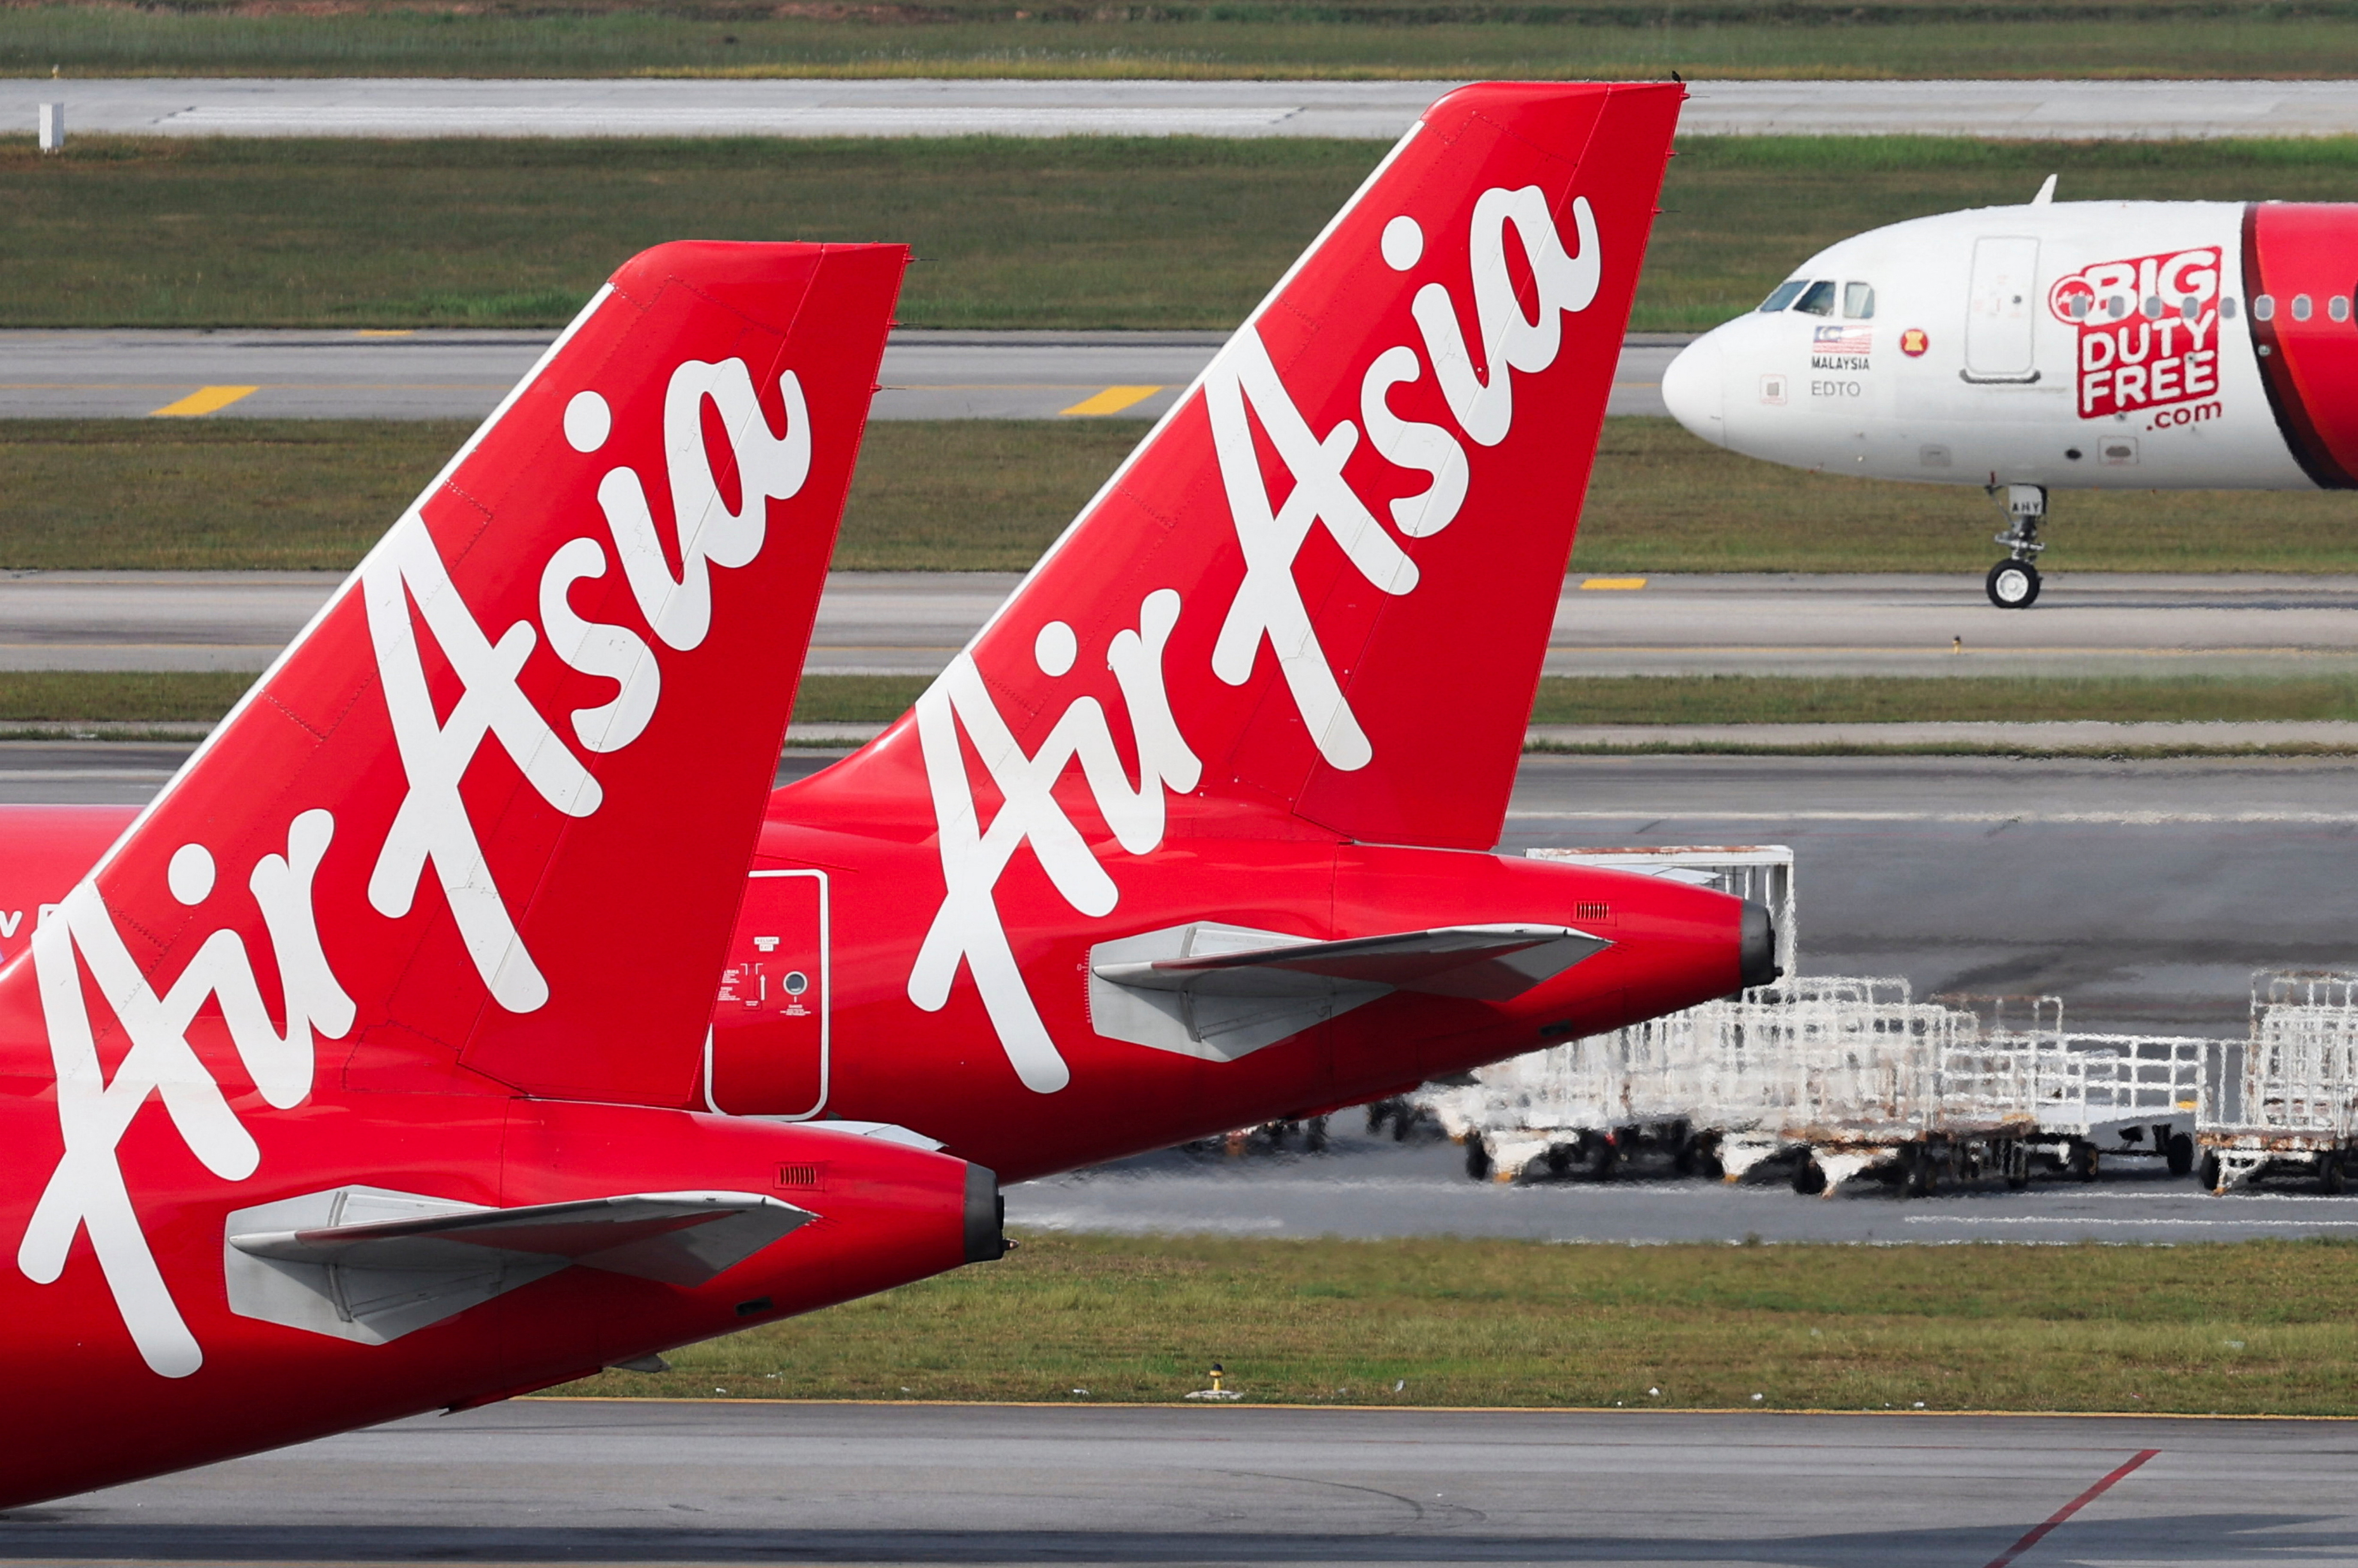 Planes from AirAsia, a subsidiary airline of Capital A, are seen on the tarmac of Kuala Lumpur International Airport Terminal 2 (KLIA2) in Sepang